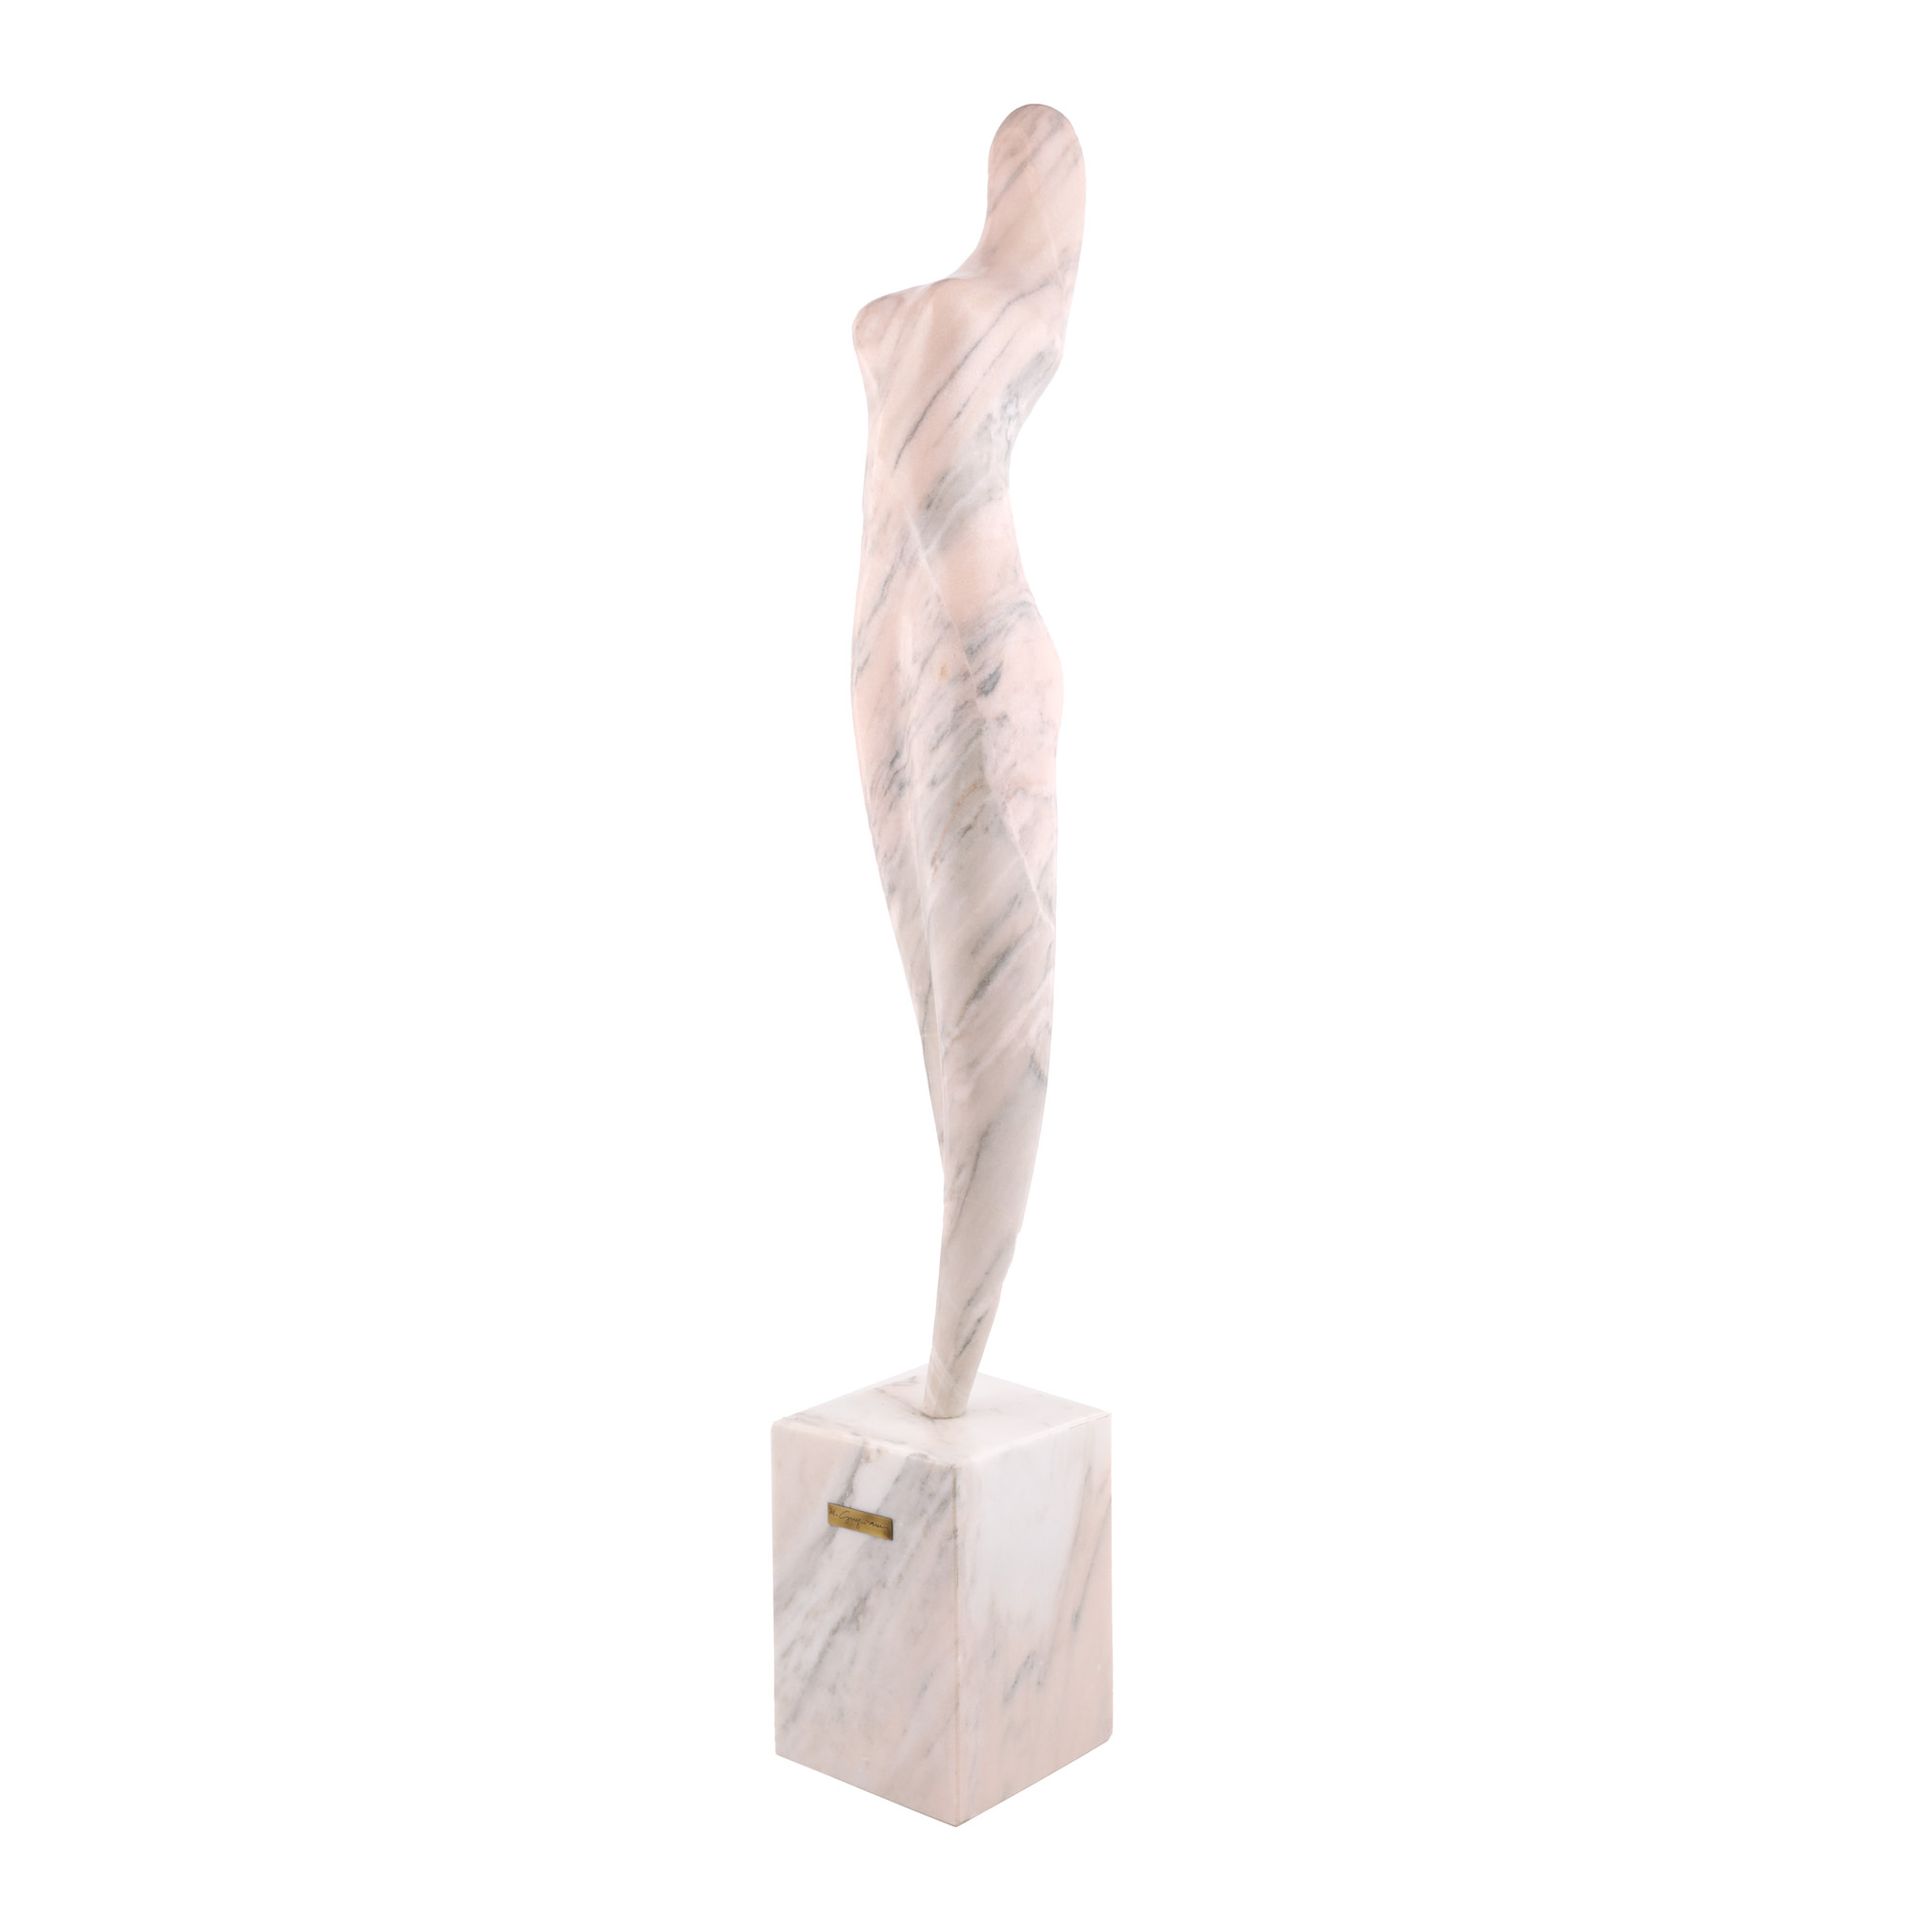 Marcel Guguianu, Muse marble, 92 x 12 x 14,